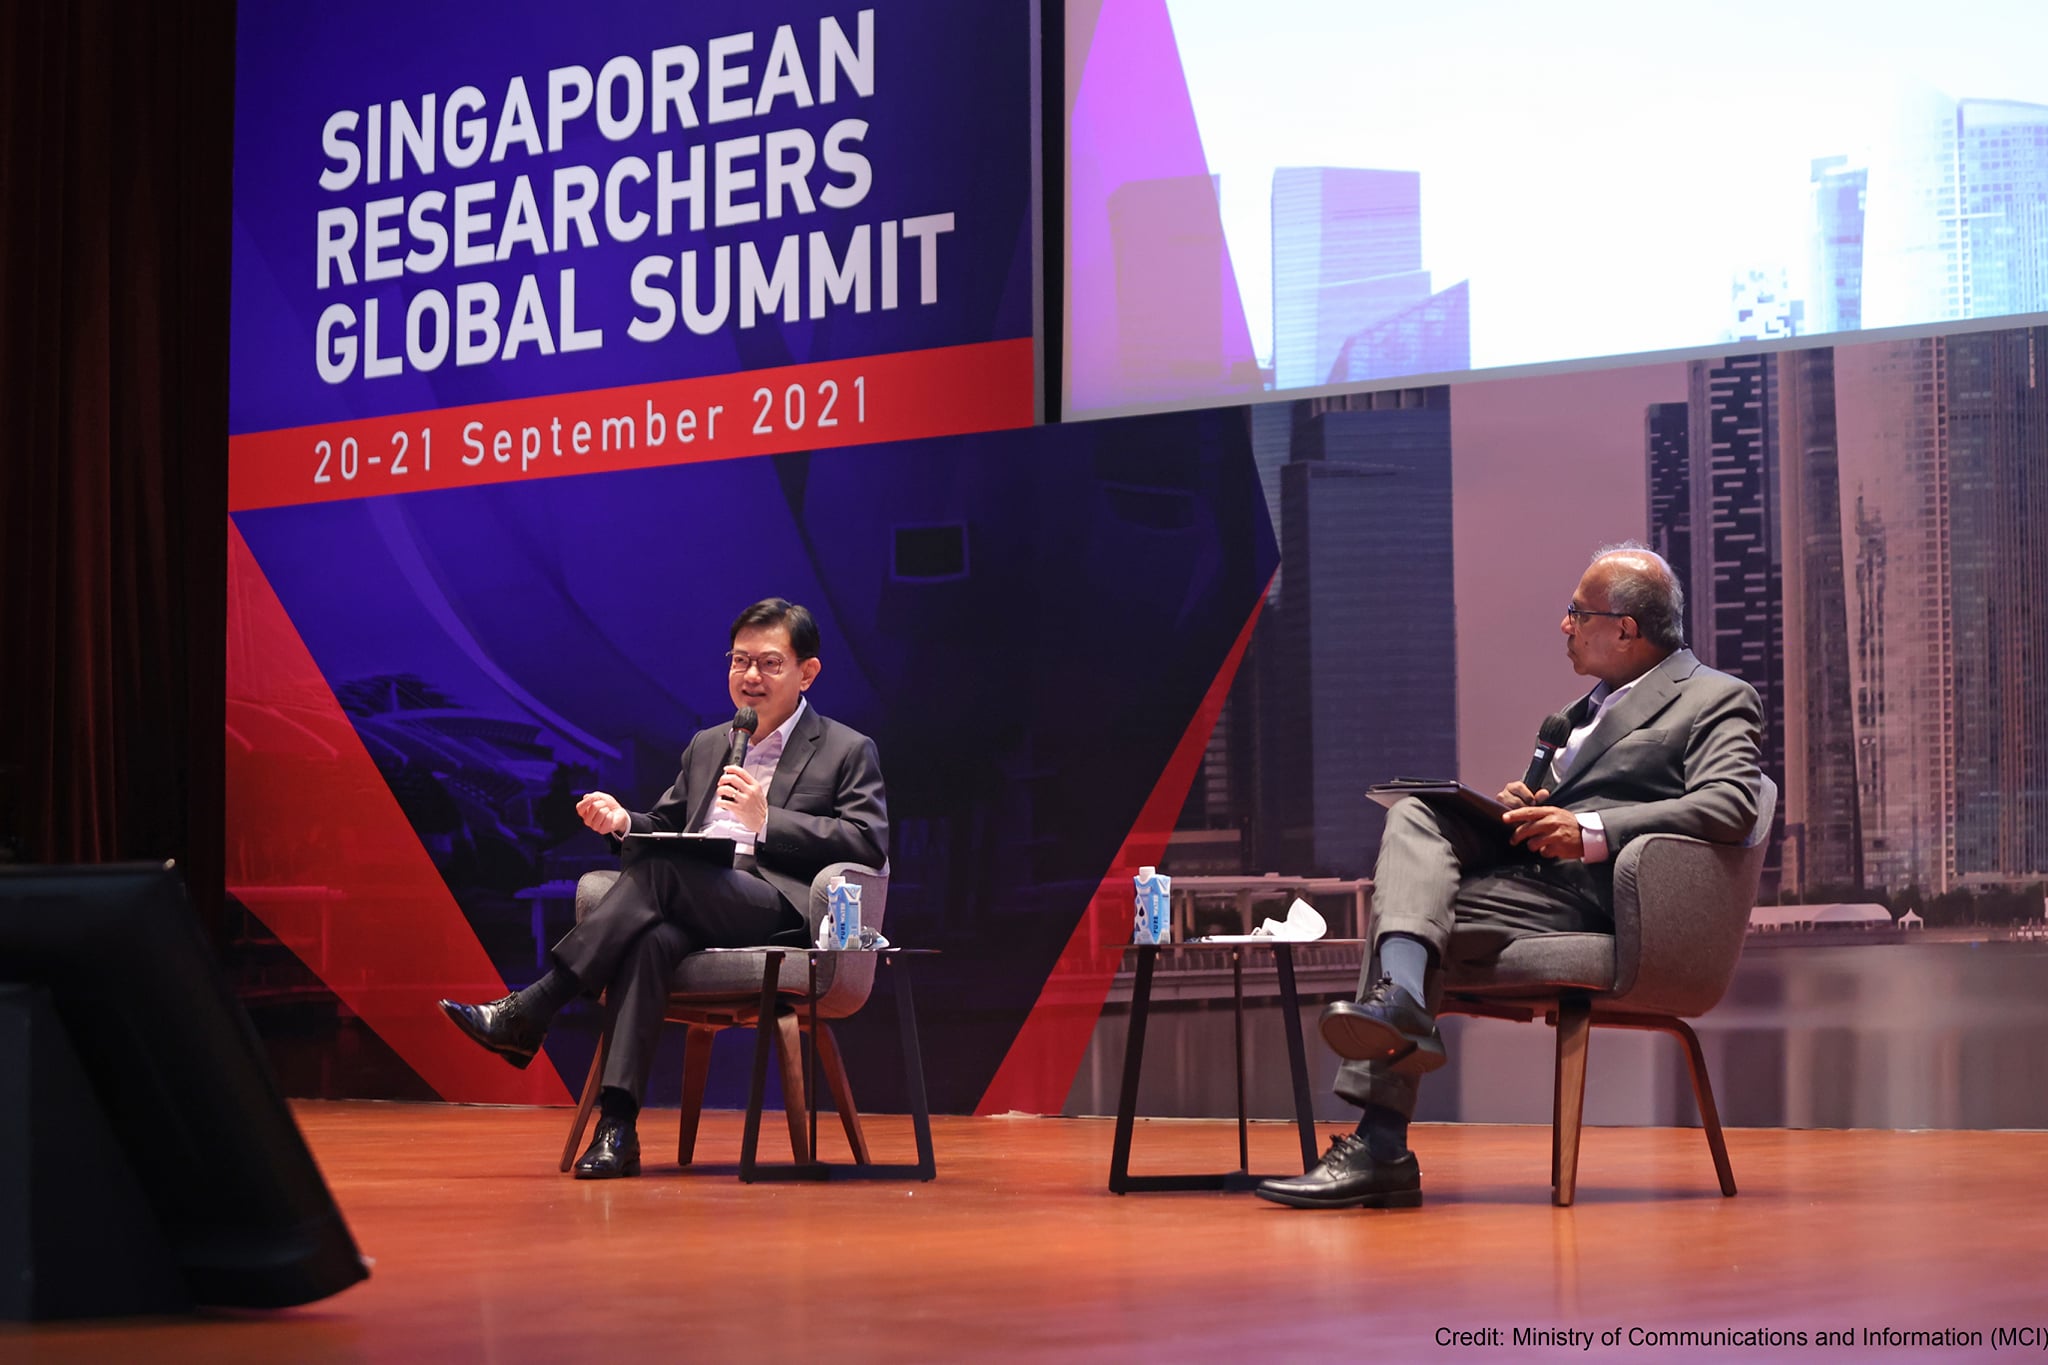 DPM Heng Swee Keat and and Prof Subra Suresh at the Singaporean Researchers Global Summit 2021